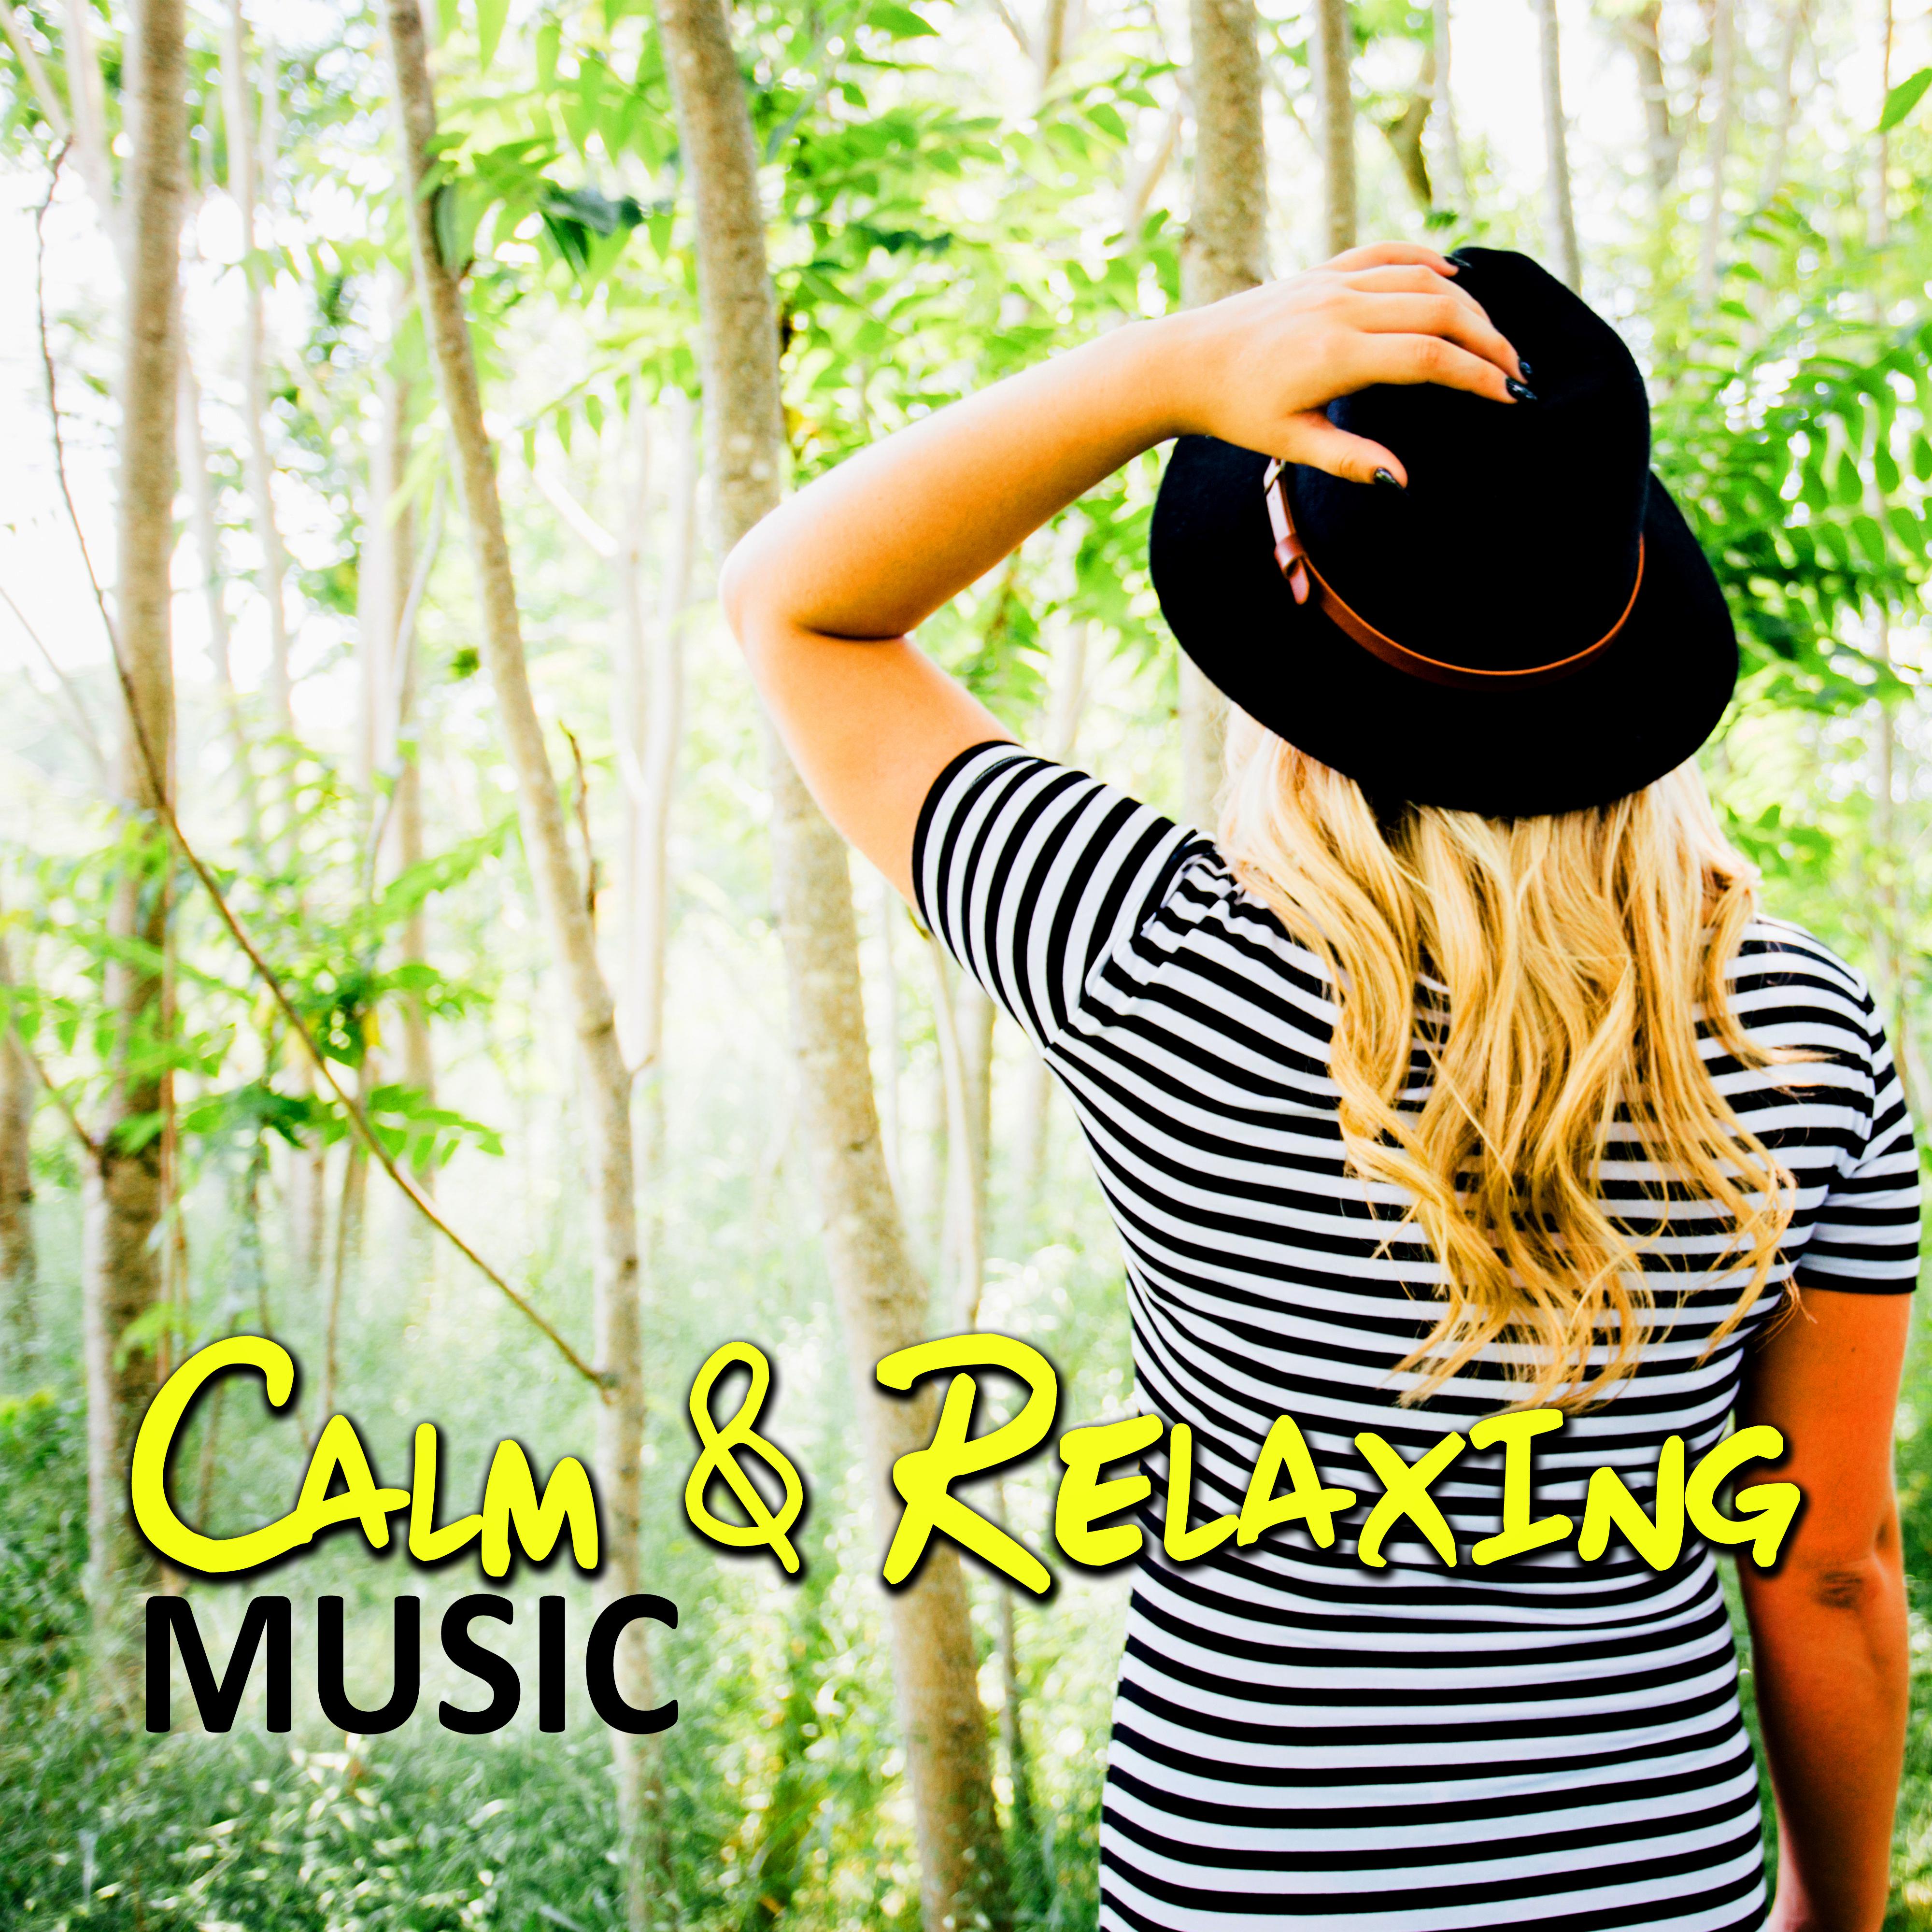 Calm & Relaxing Music - Soothing Music for Reduce Stress, Meditation, Good Mood, Sentimental Journey, Relaxation Music on Everyday, Cool Music